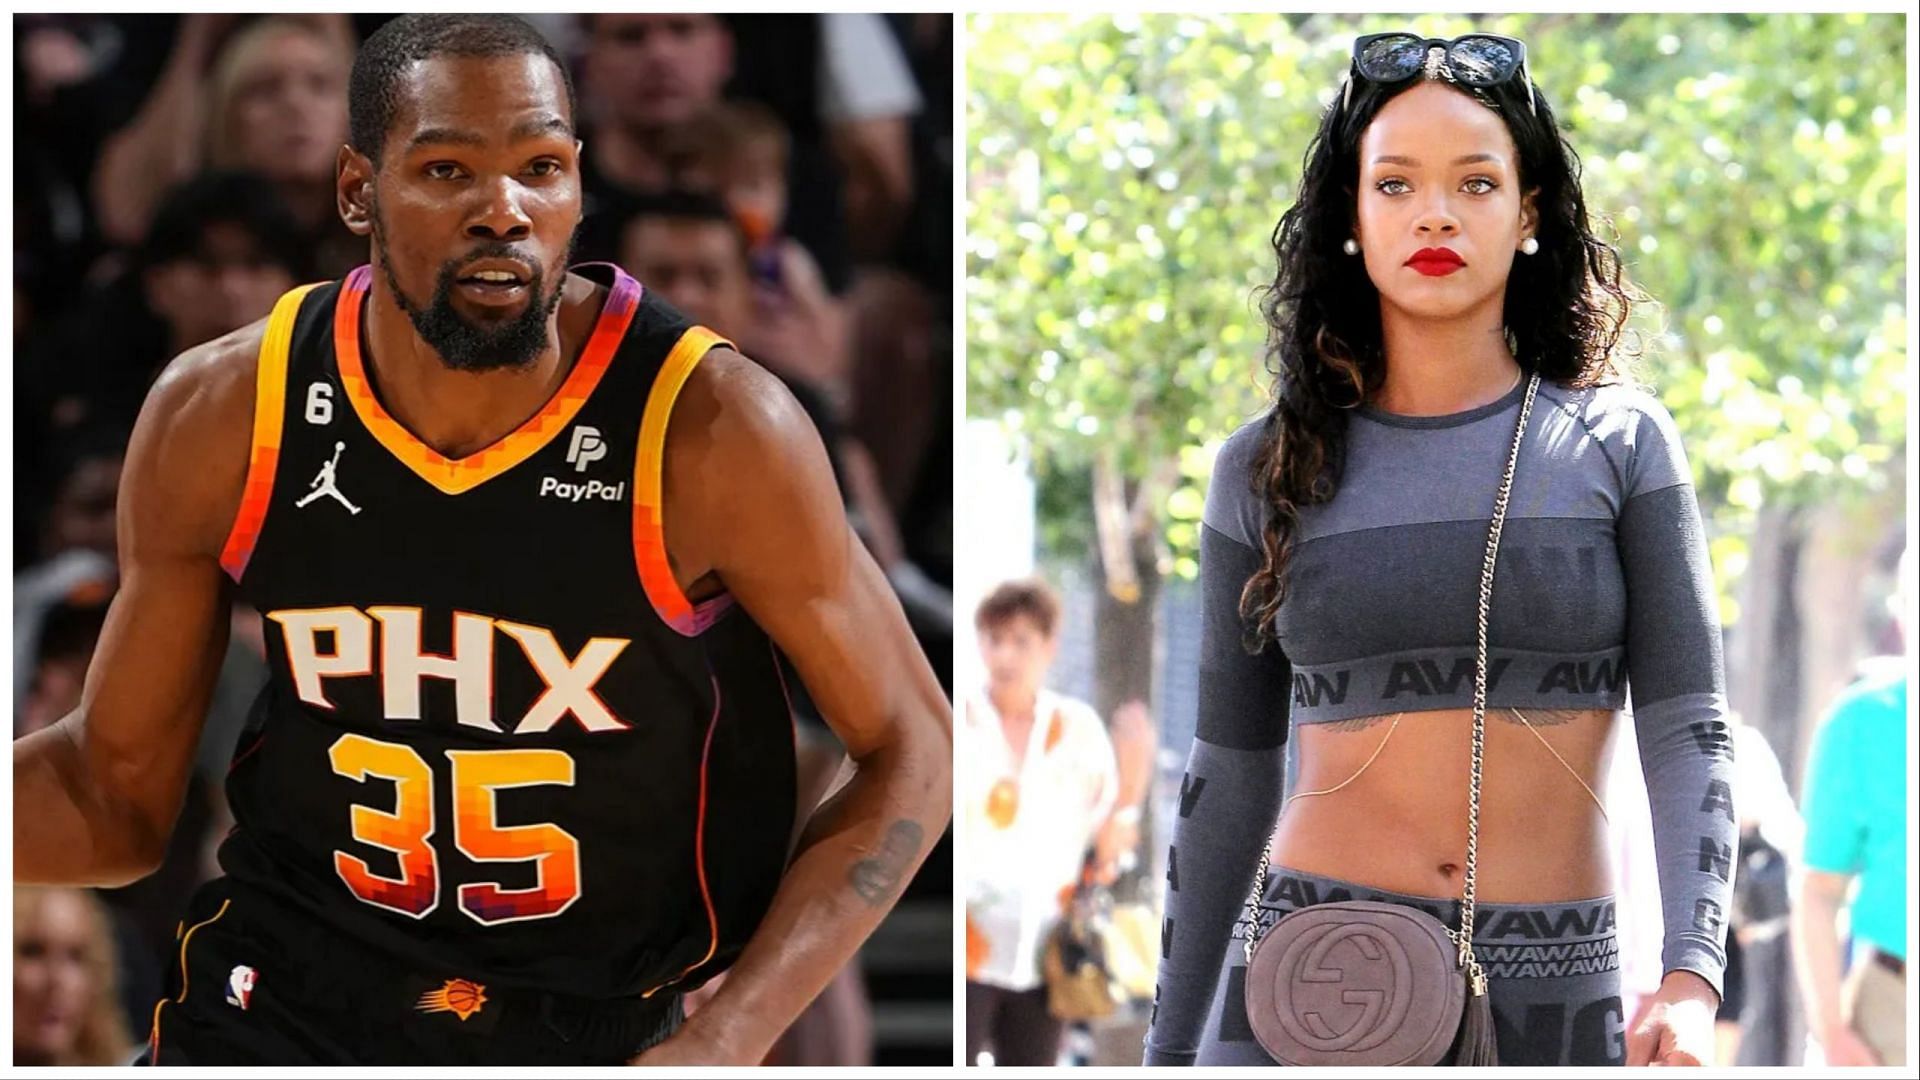 Addressing the question about Kevin Durant and Rihanna